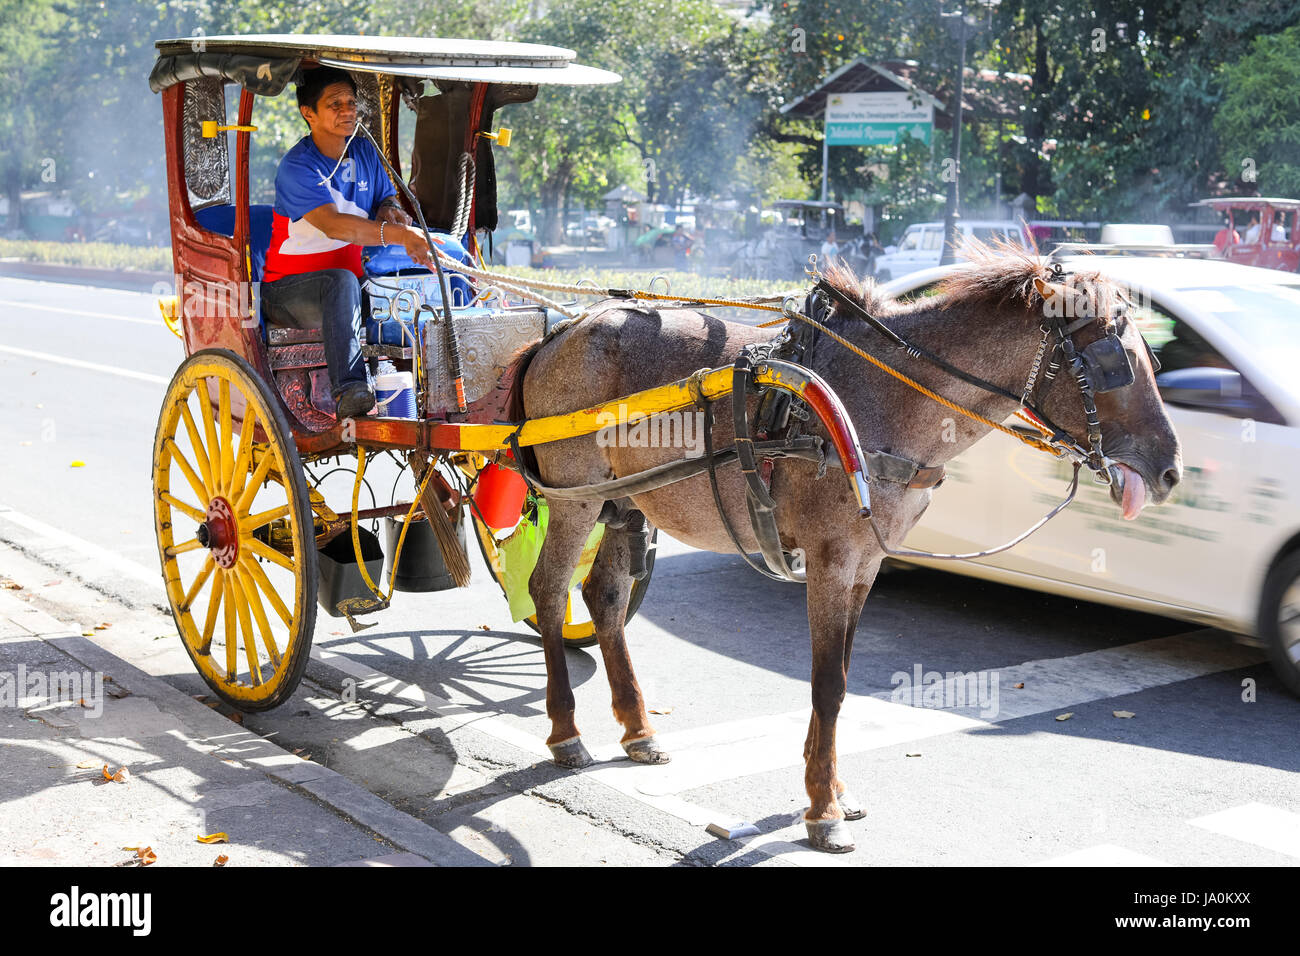 Manila Horse Cart High Resolution Stock Photography and Images - Alamy